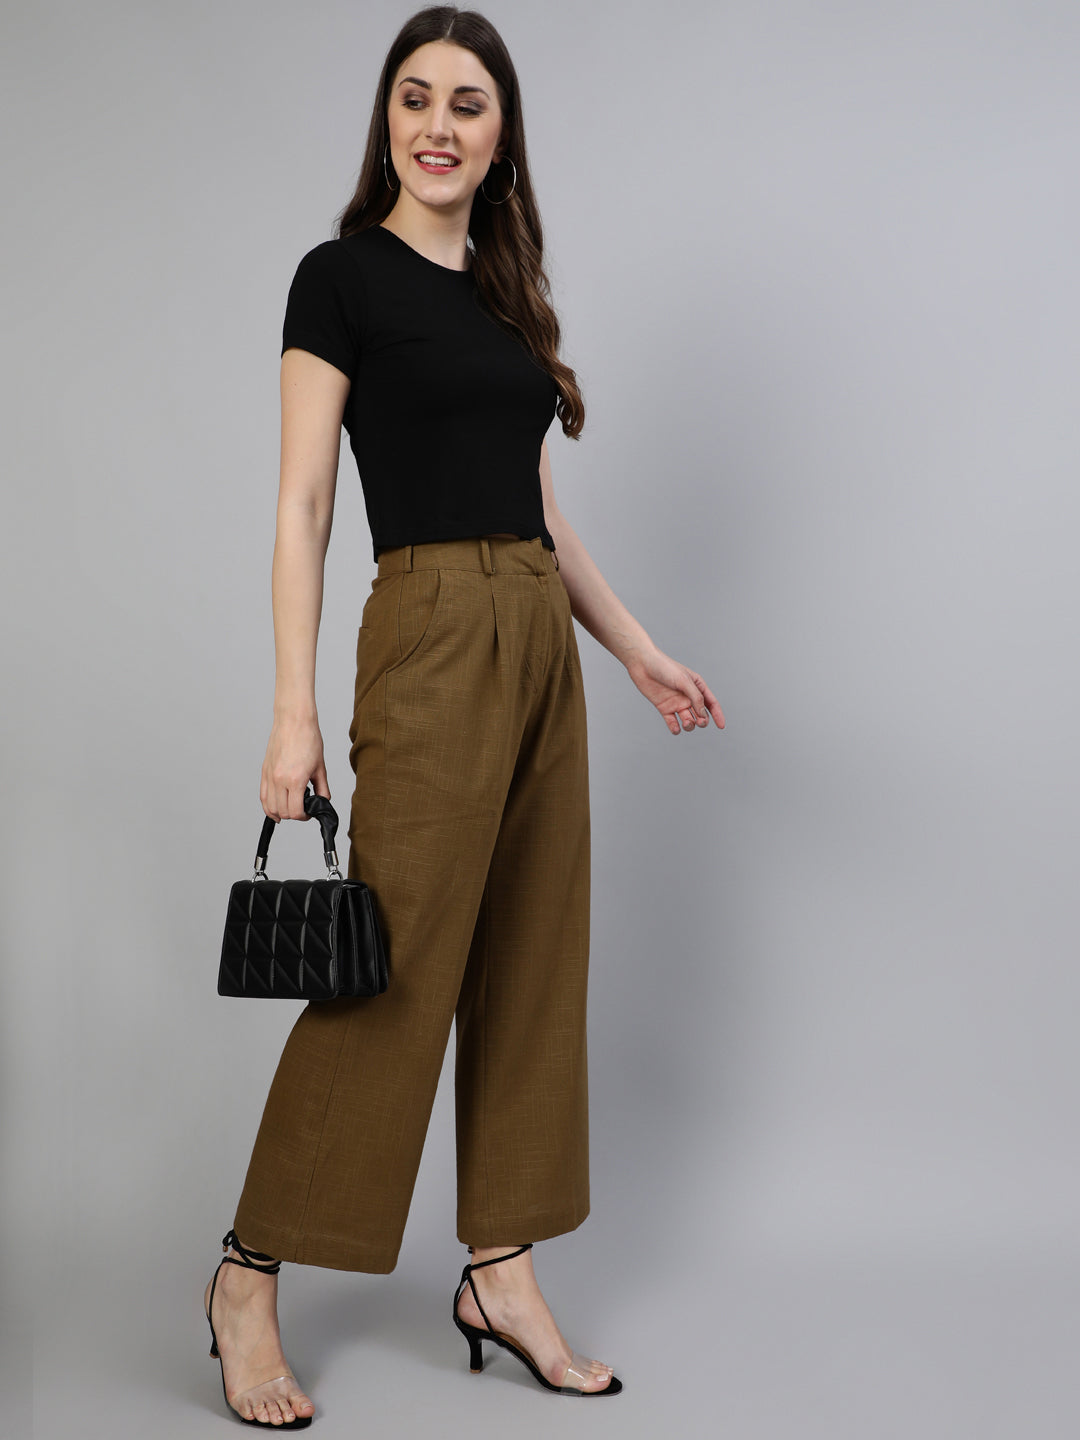 Buy Ankle Length Pants for Women